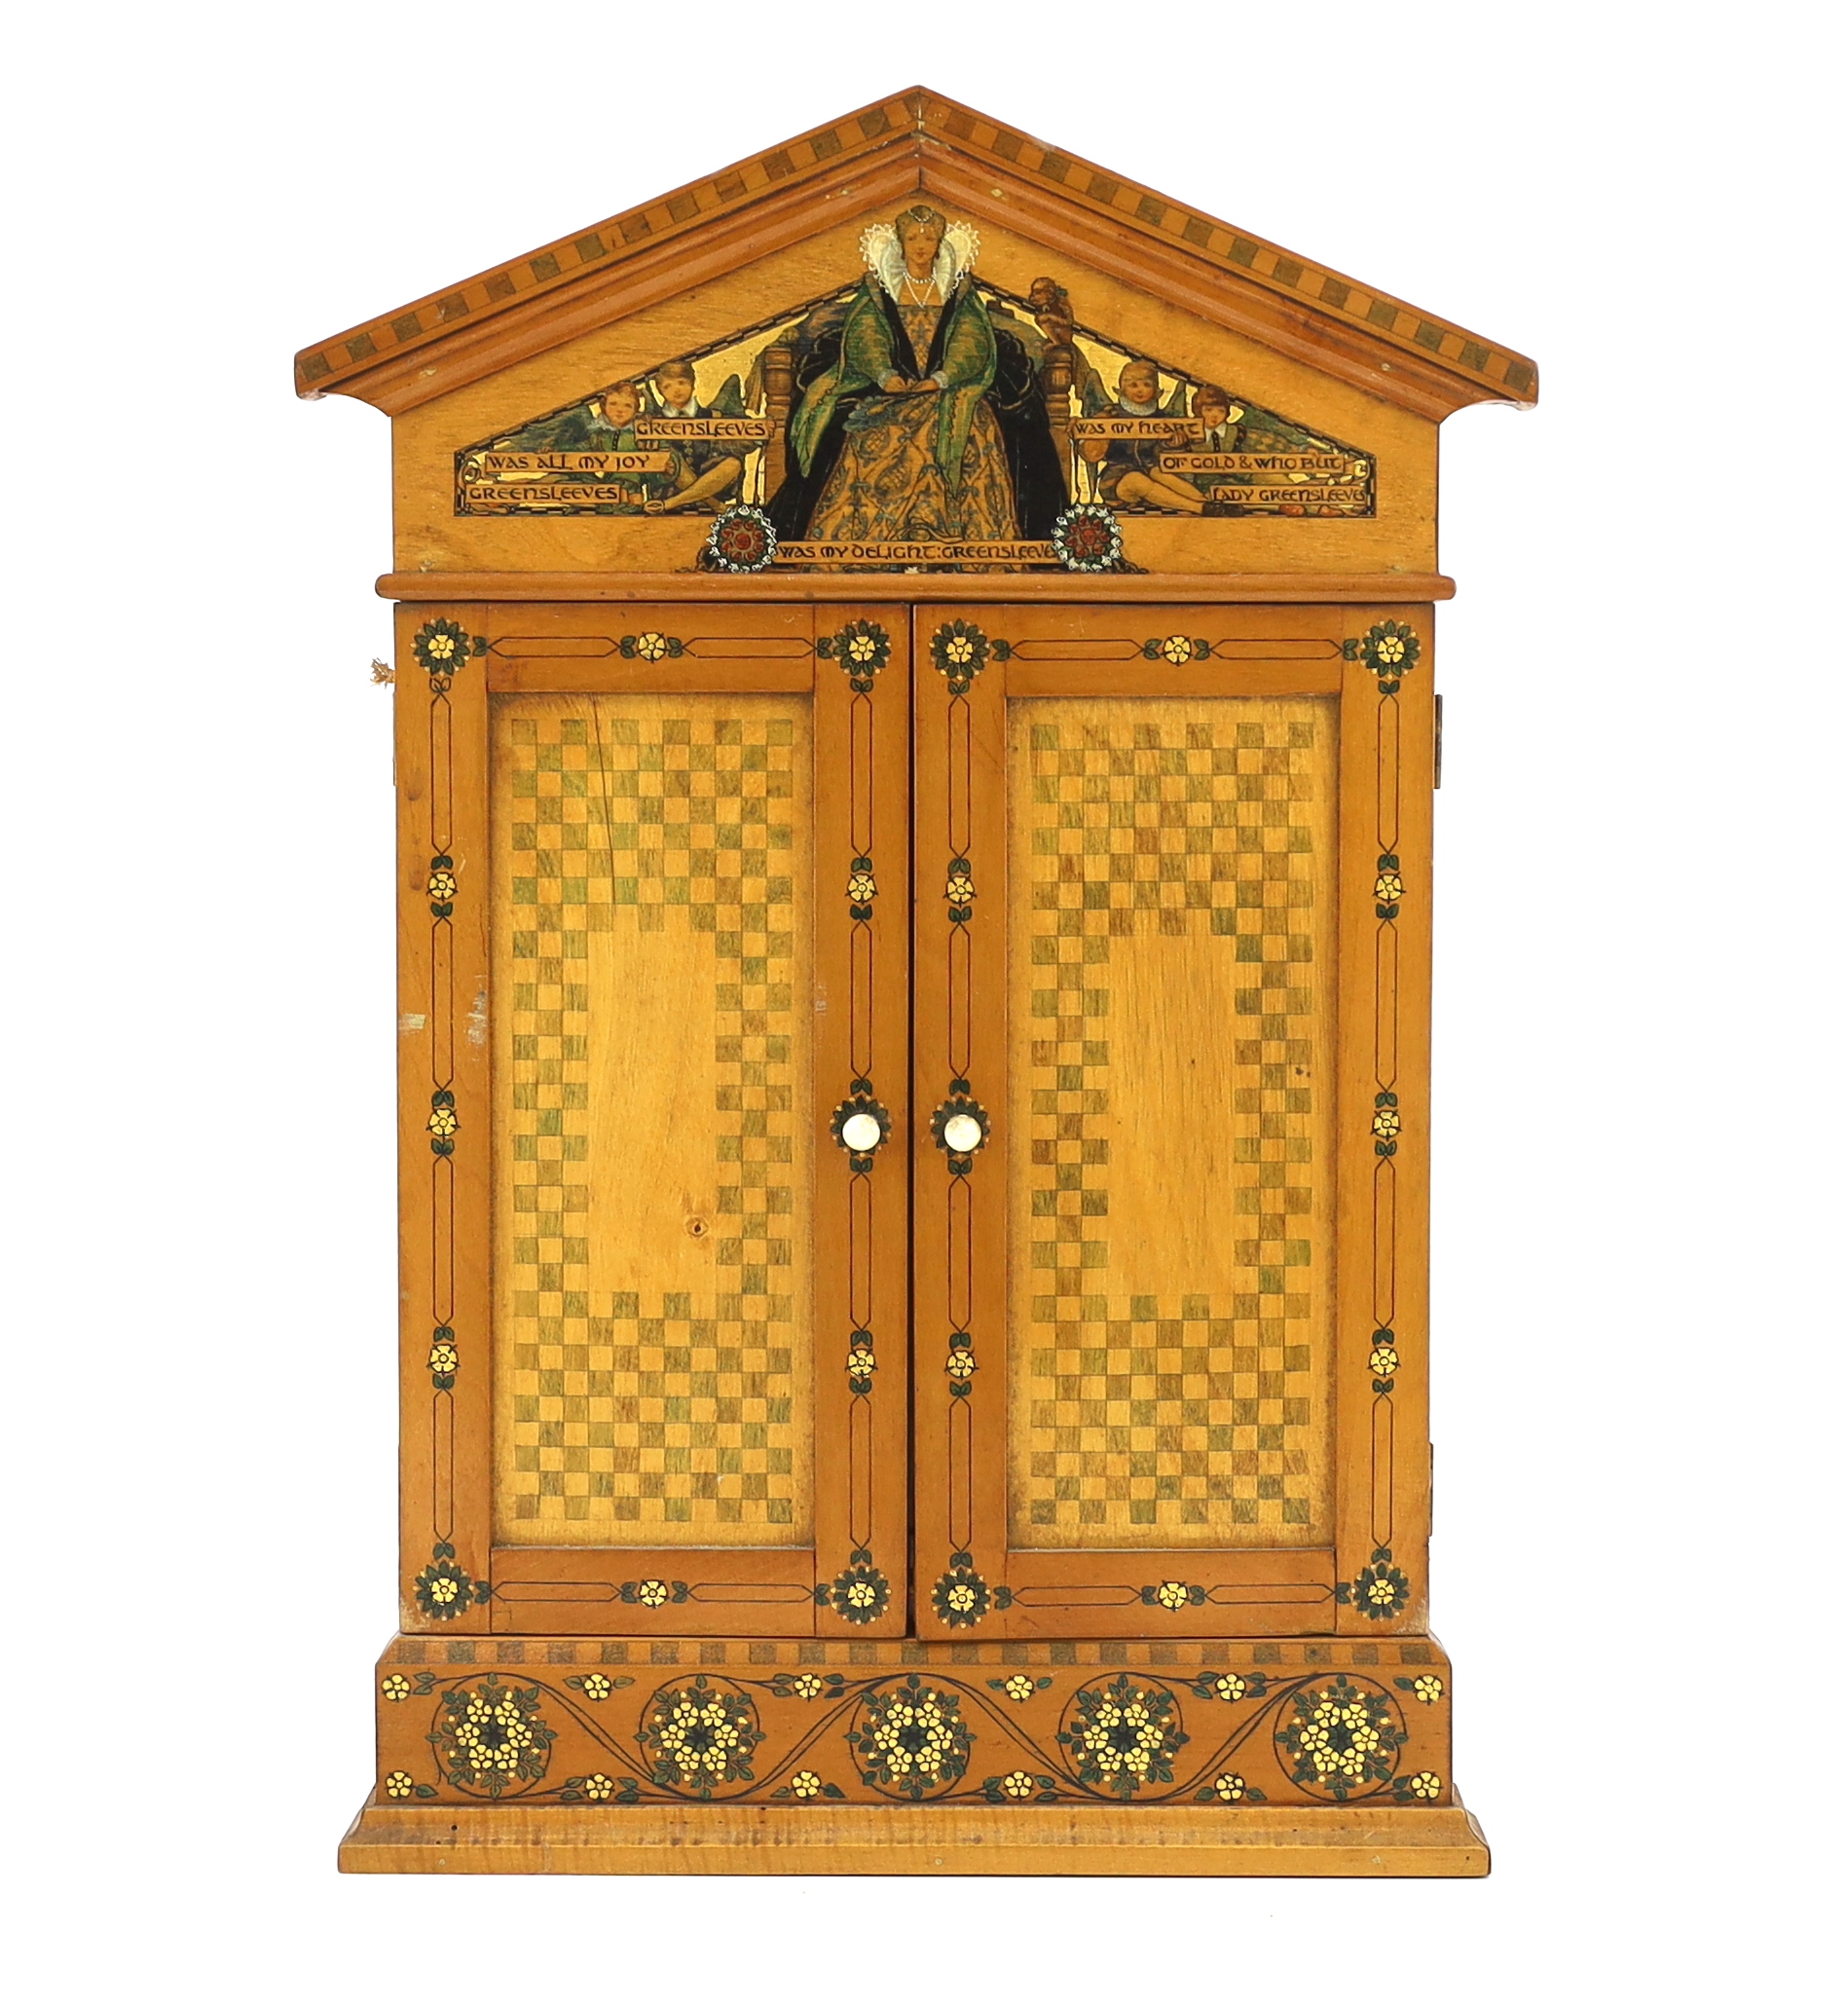 Gwendolyn White , The Greensleeves Triptych, whitewood with stained and gilt gesso decoration, 33cm wide, 3cm deep, 48cm high